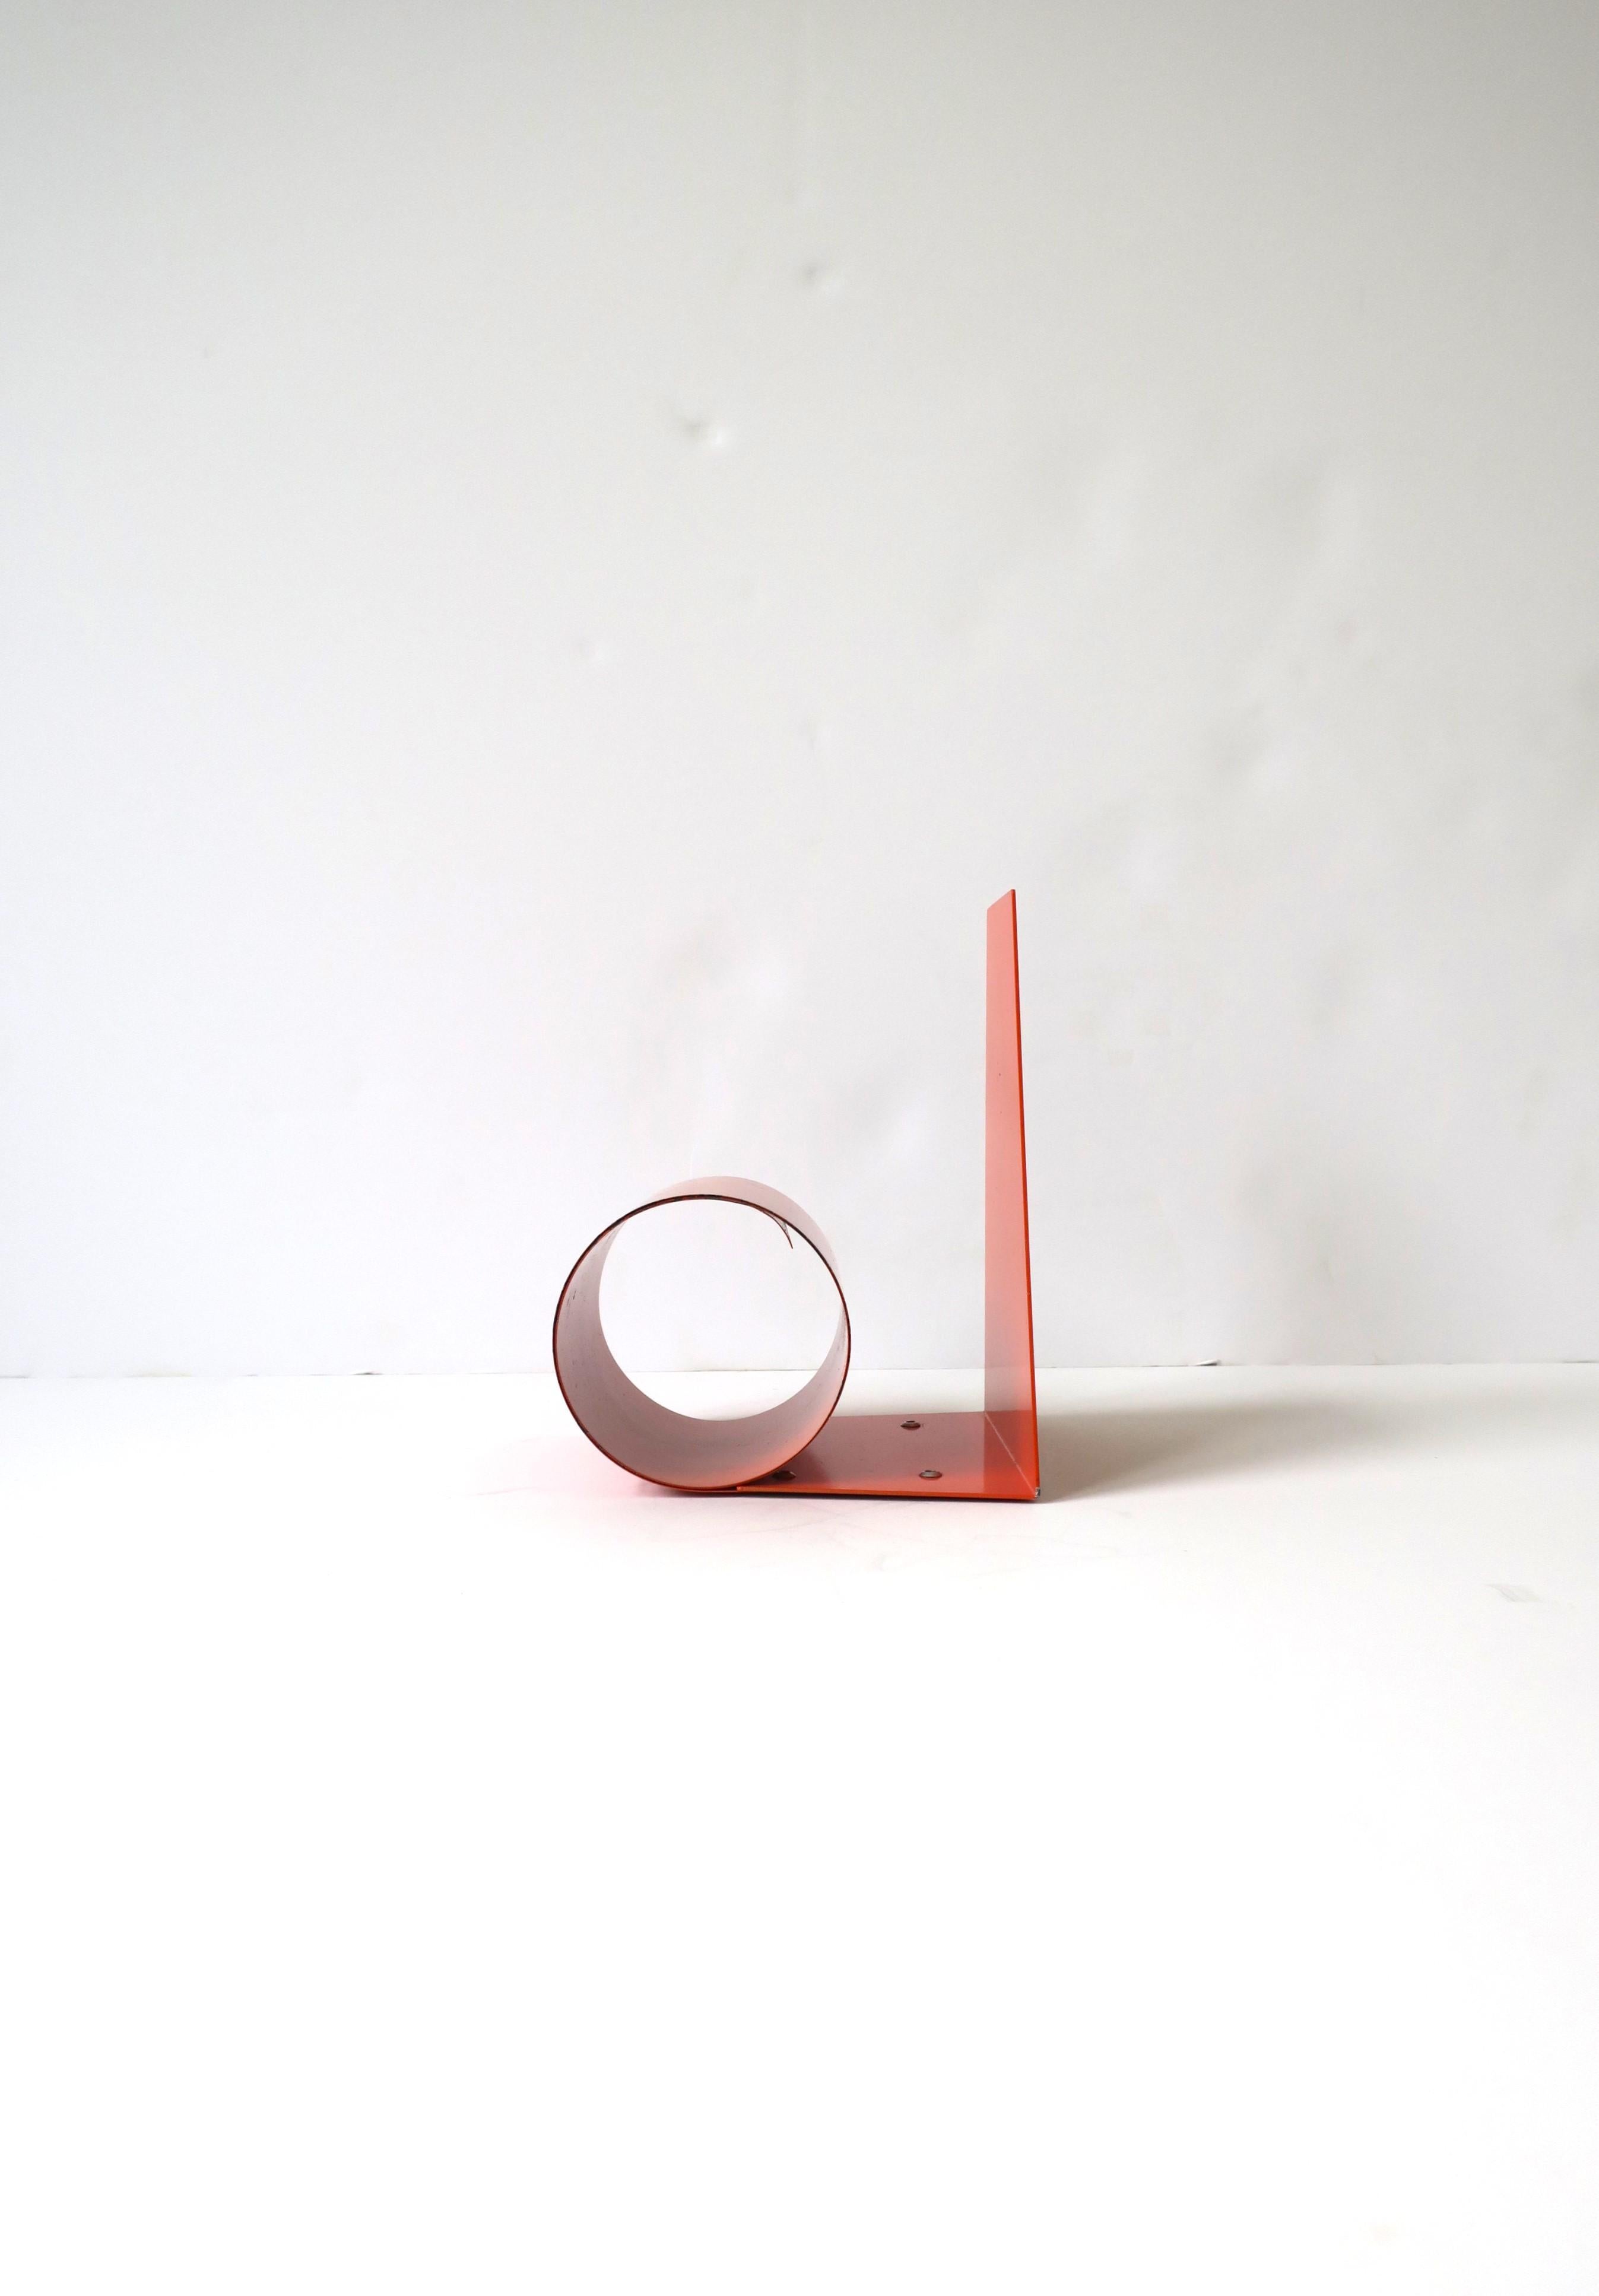 20th Century Midcentury Modern Expandable Orange Metal Bookend Holder, Made in England For Sale